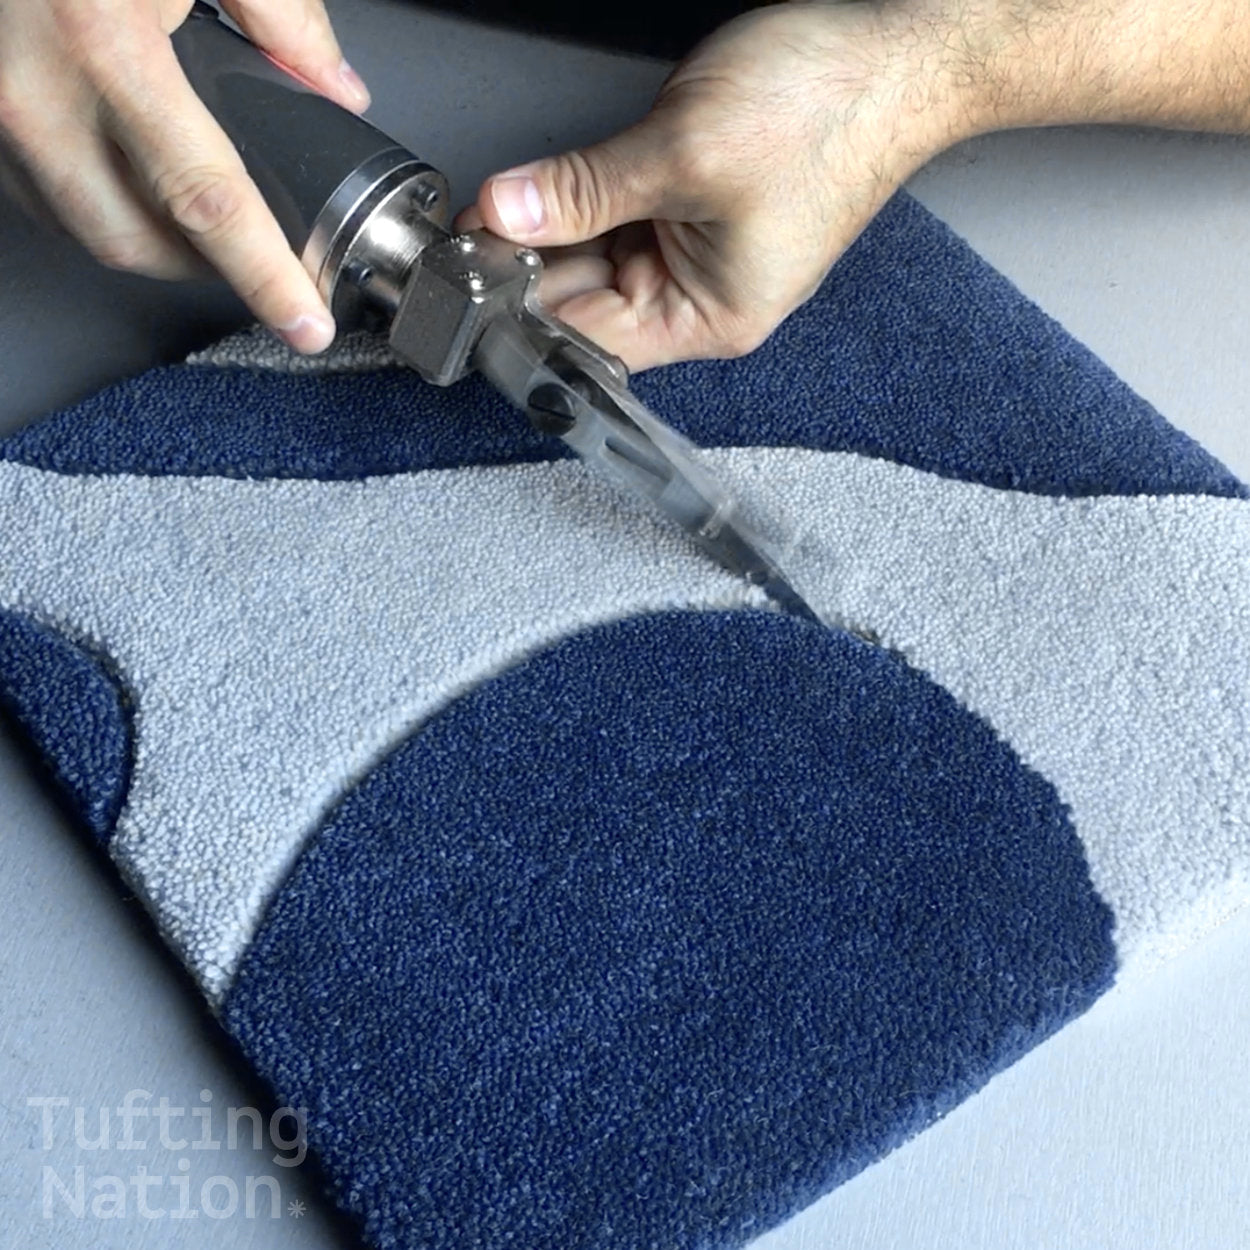 Rug Carving Scissors in action over a handmade tufted rug